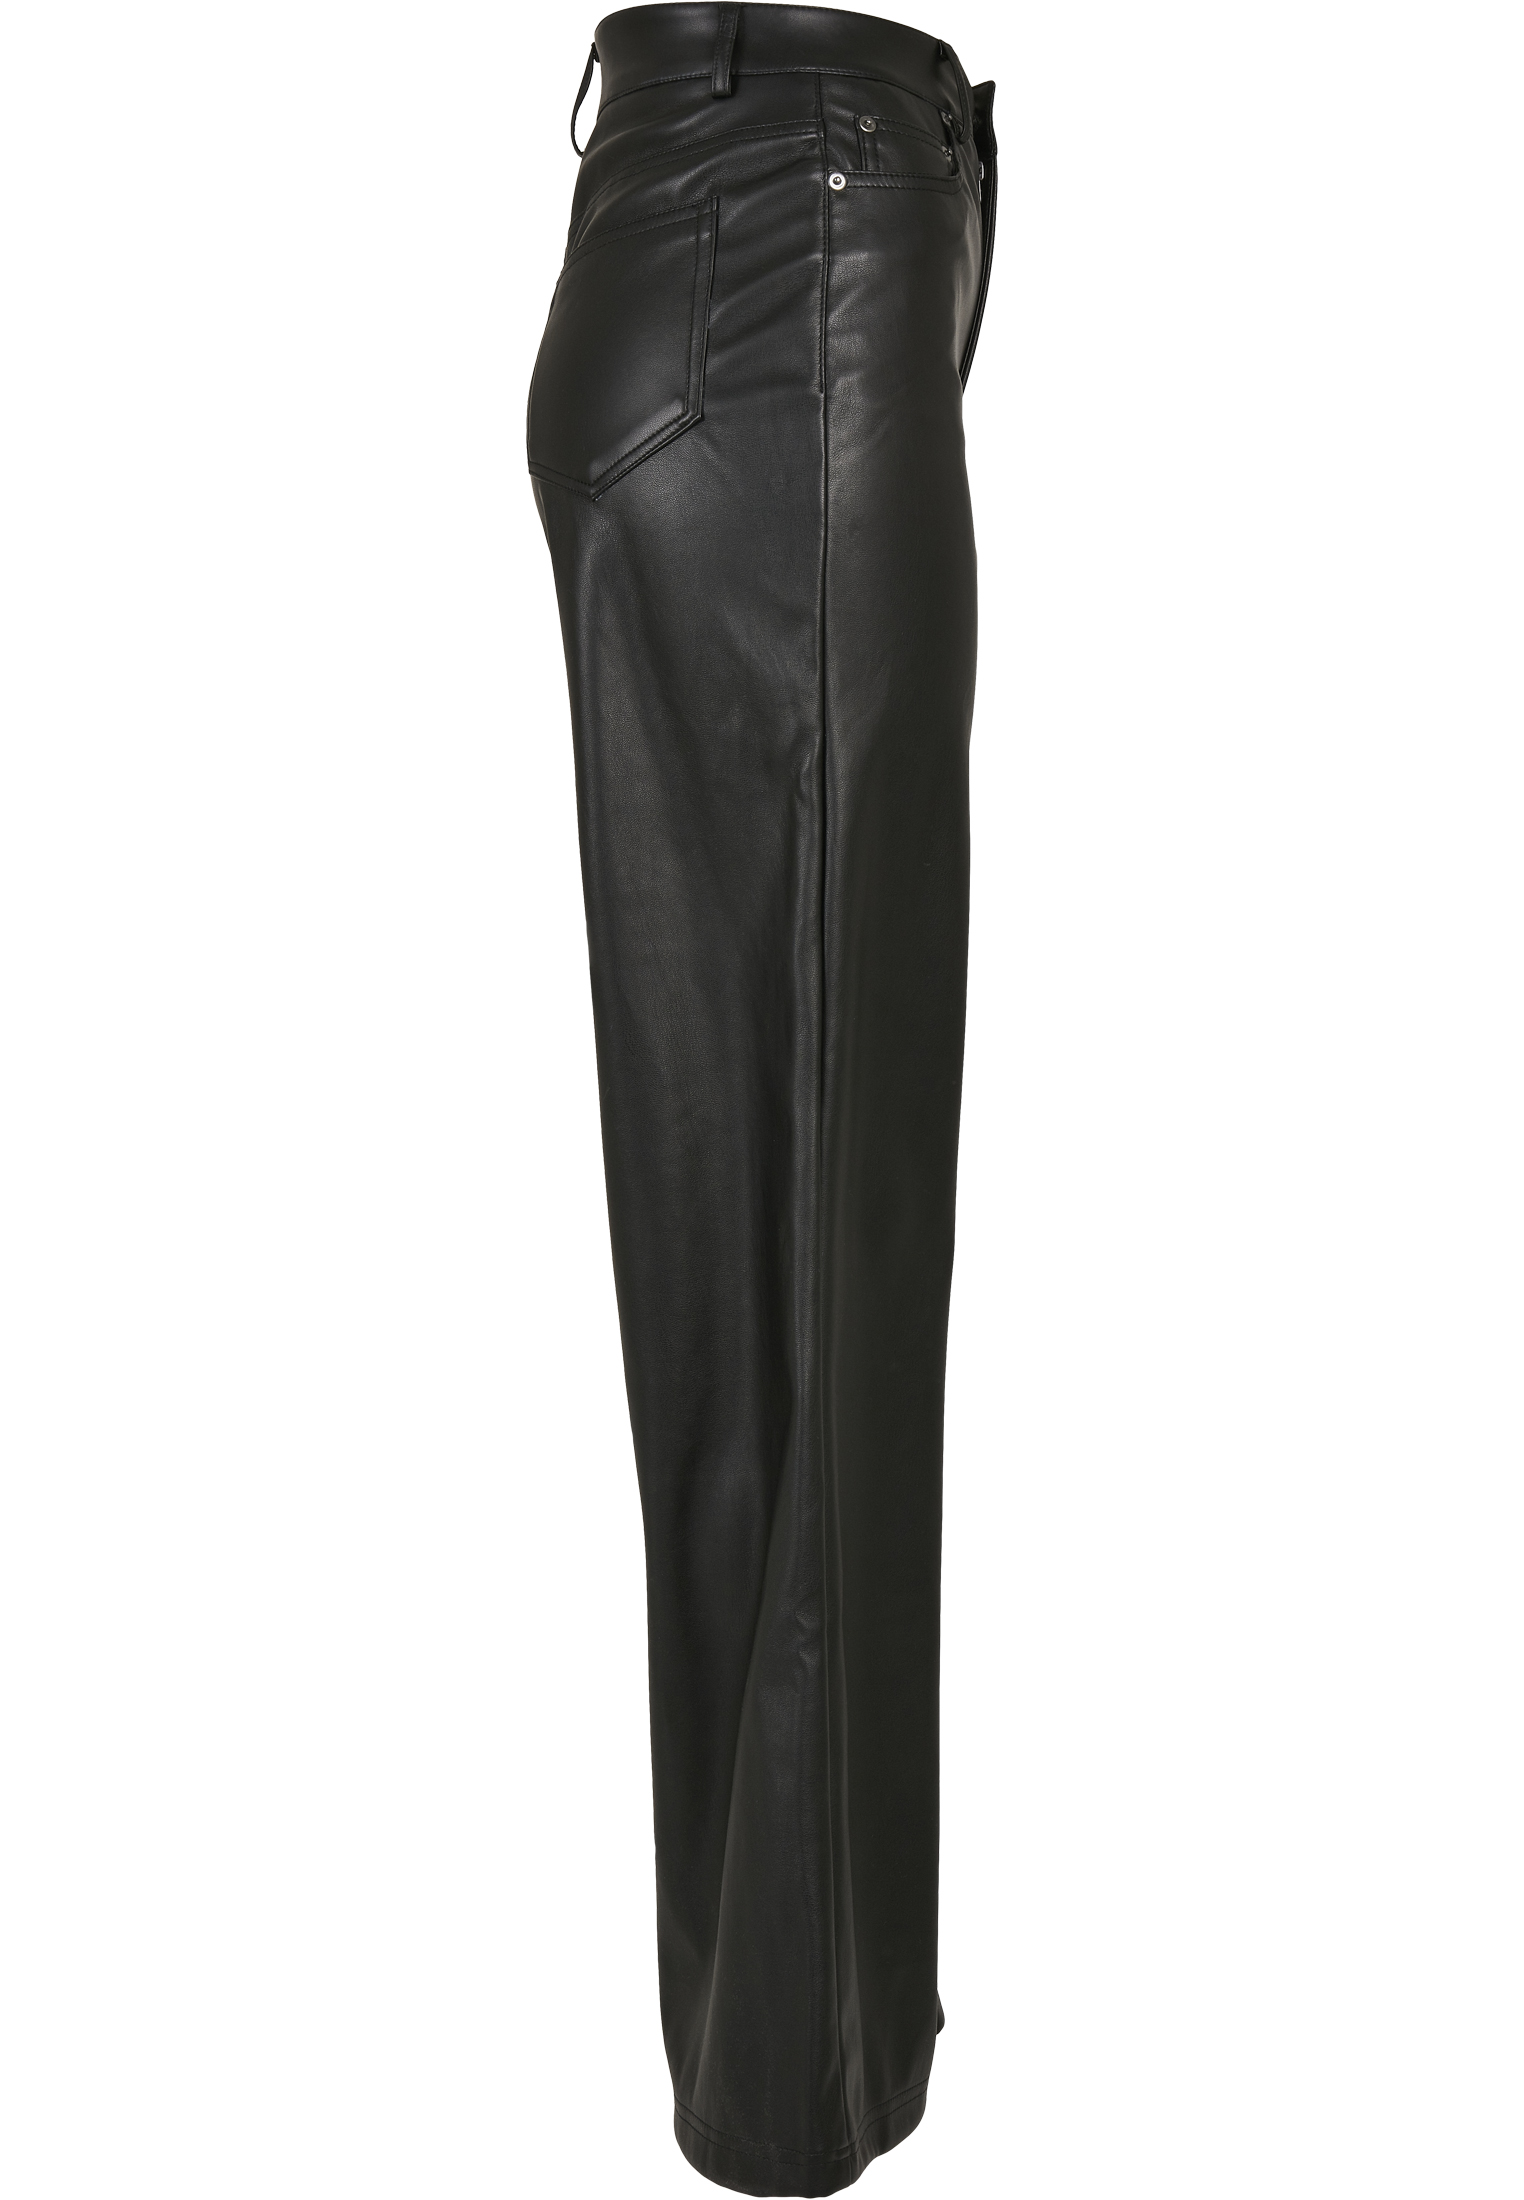 Buy Leather Pants Women Online In India  Etsy India